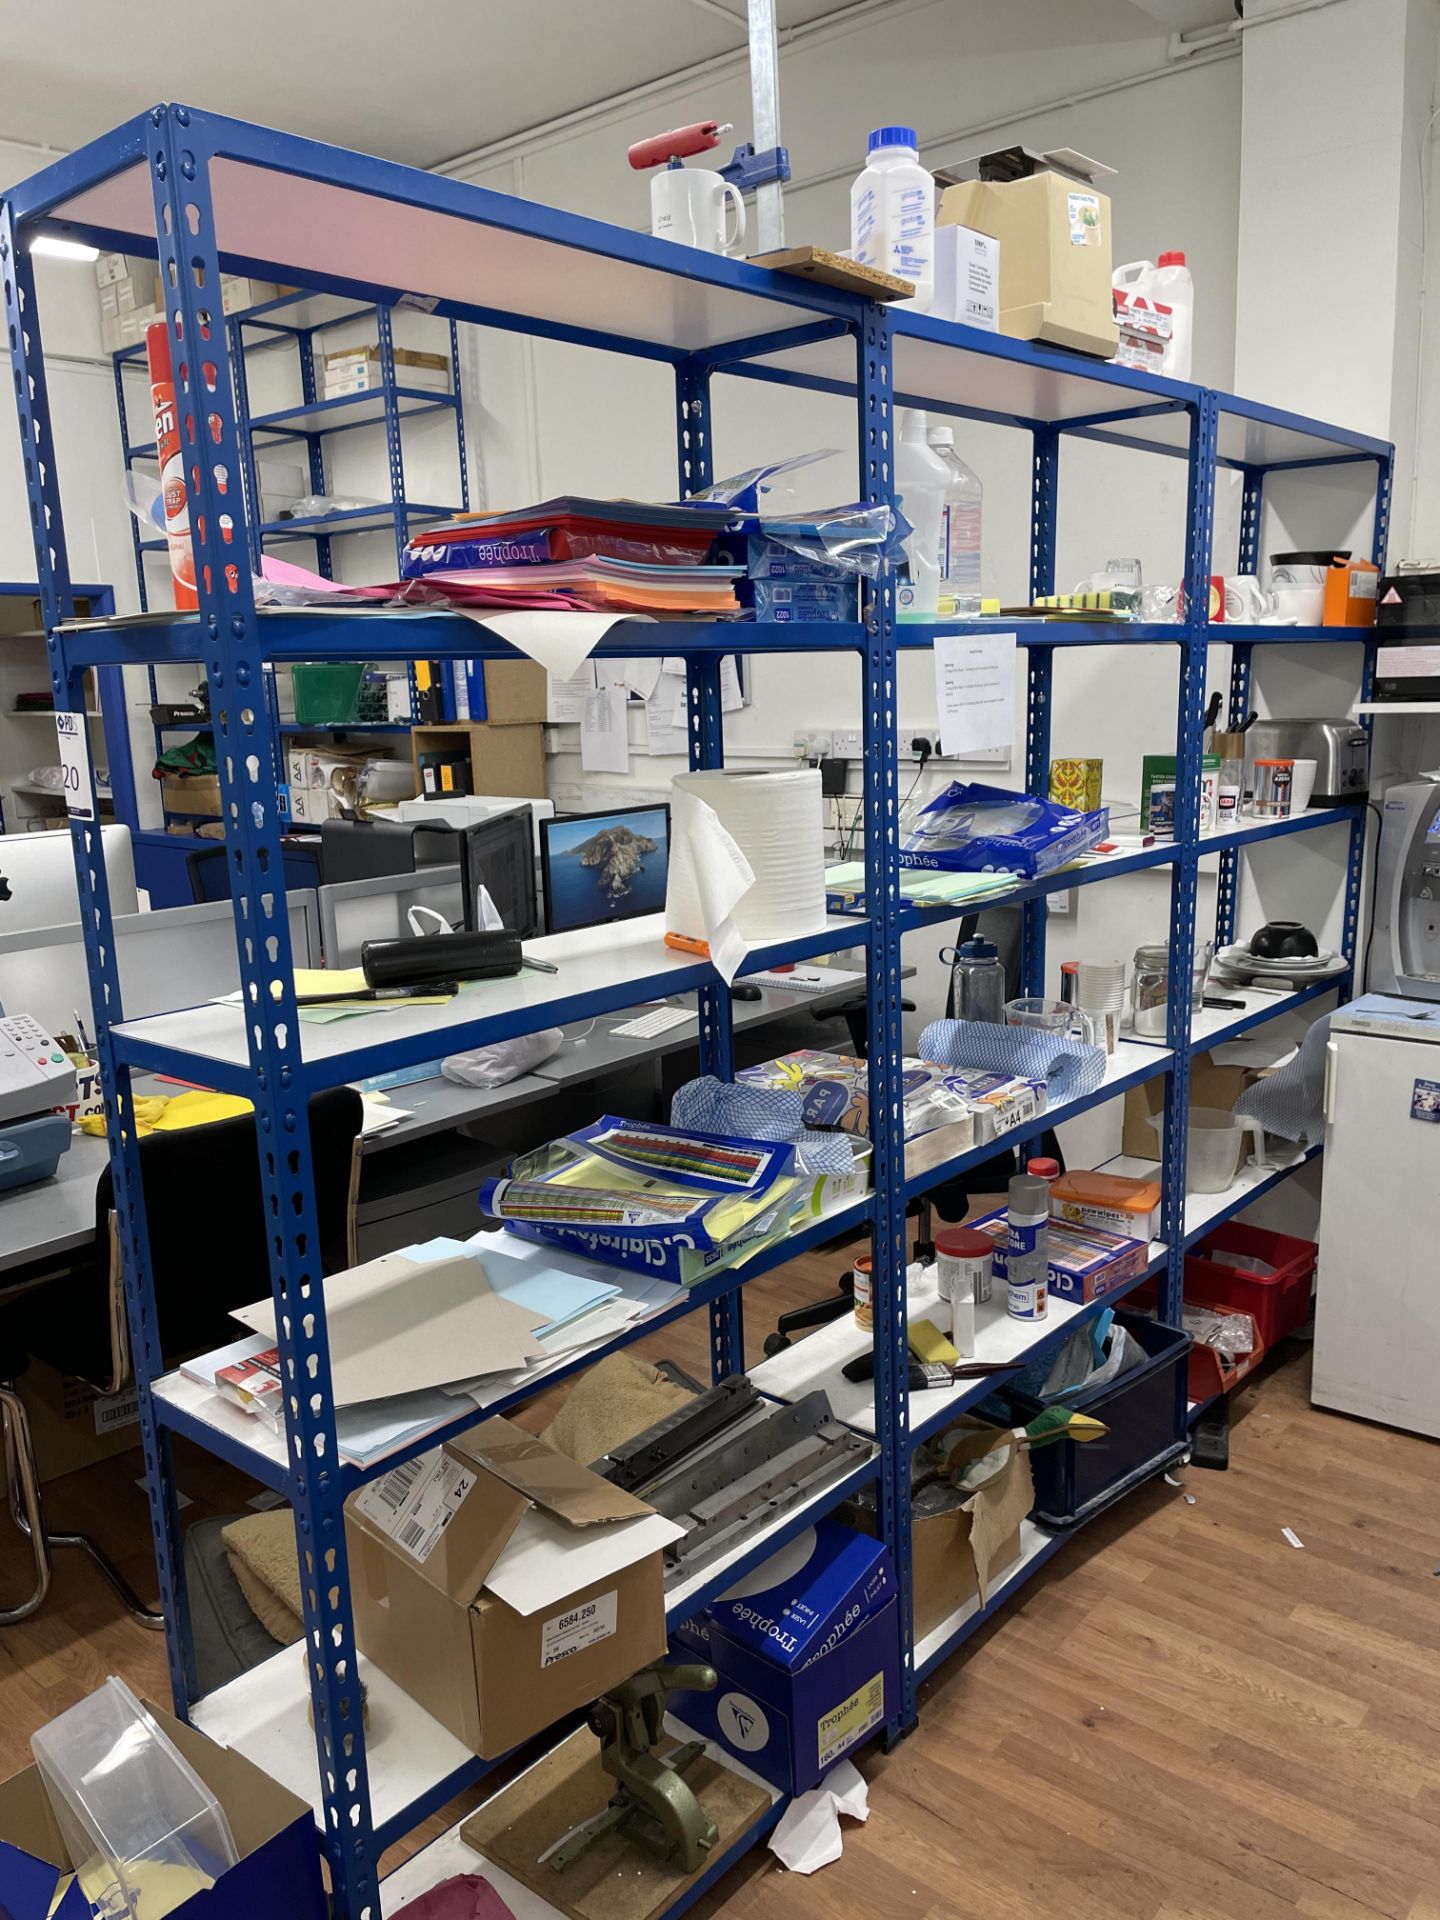 3 Bays of LPE36 6-Tier Slotted Steel Shelving (Location: Finchley. Please Refer to General Notes)